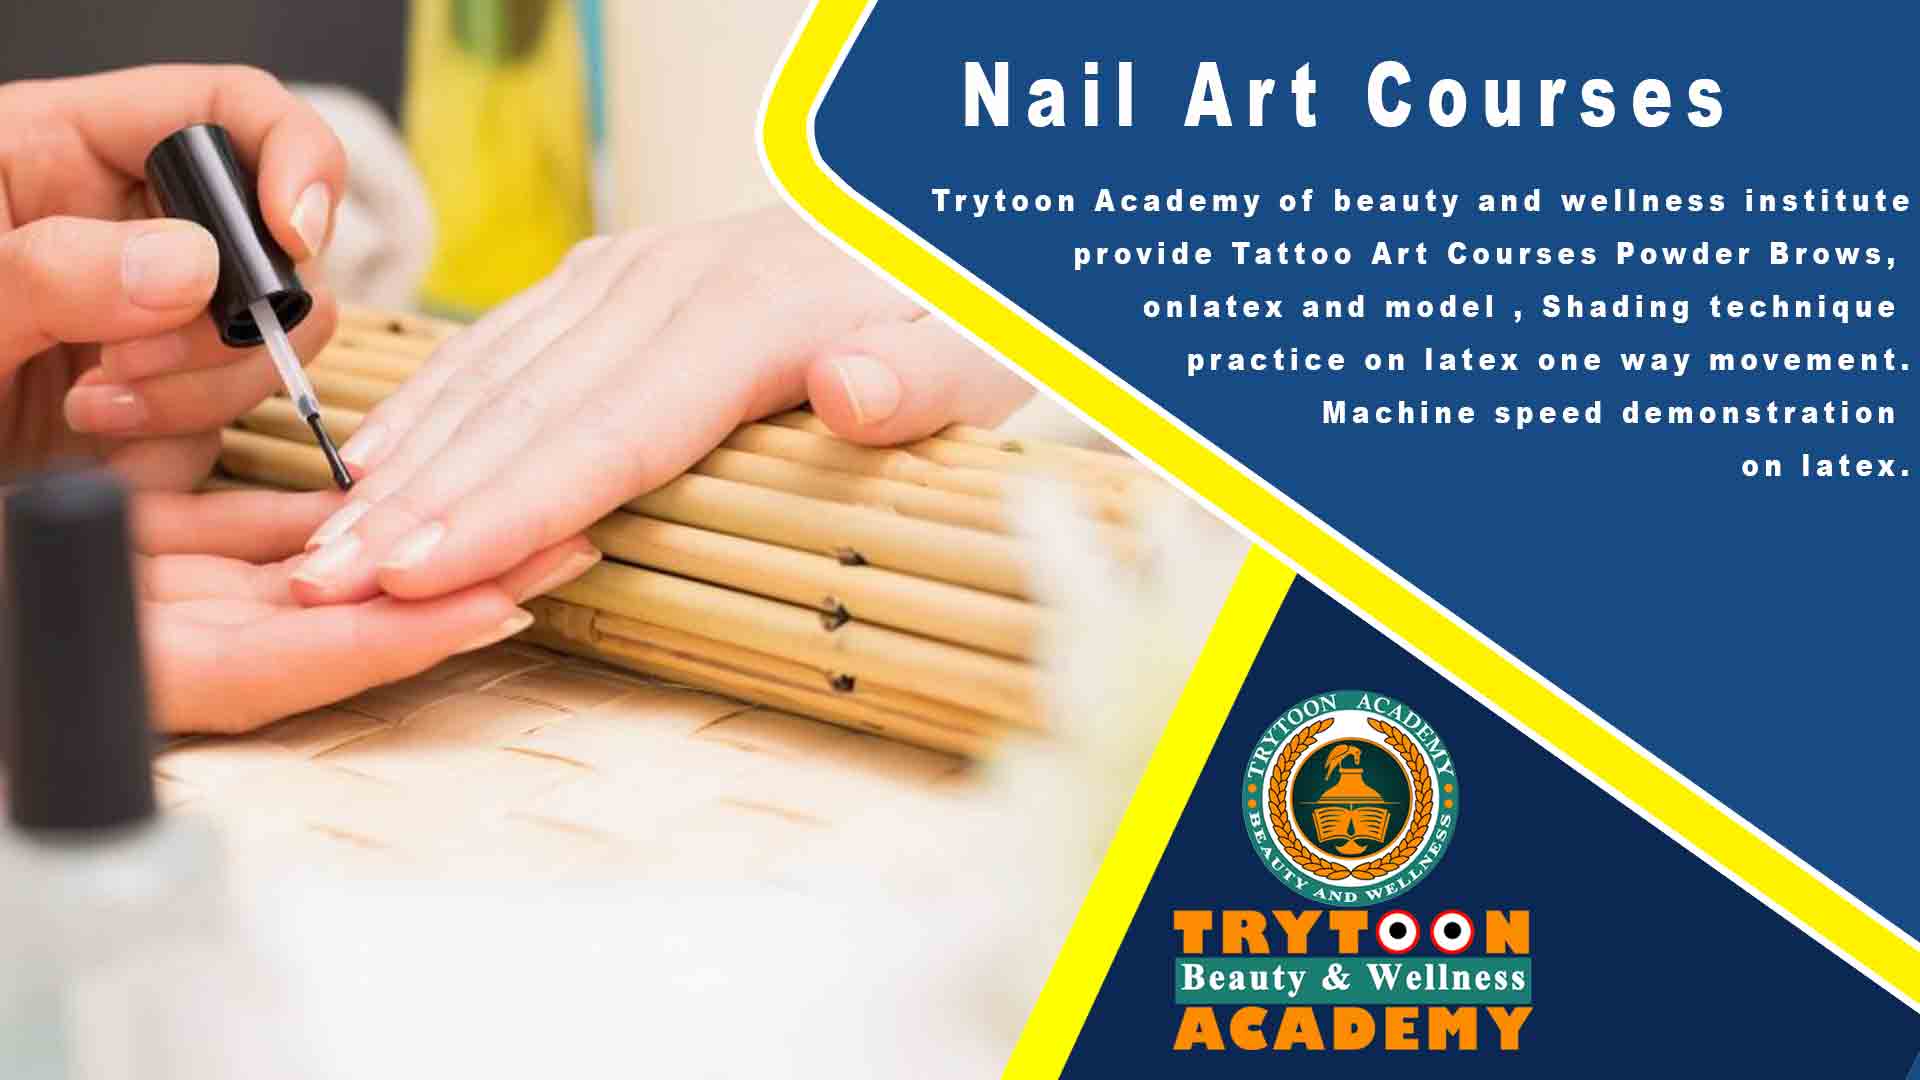 5. The Nail Art School Pune - wide 2